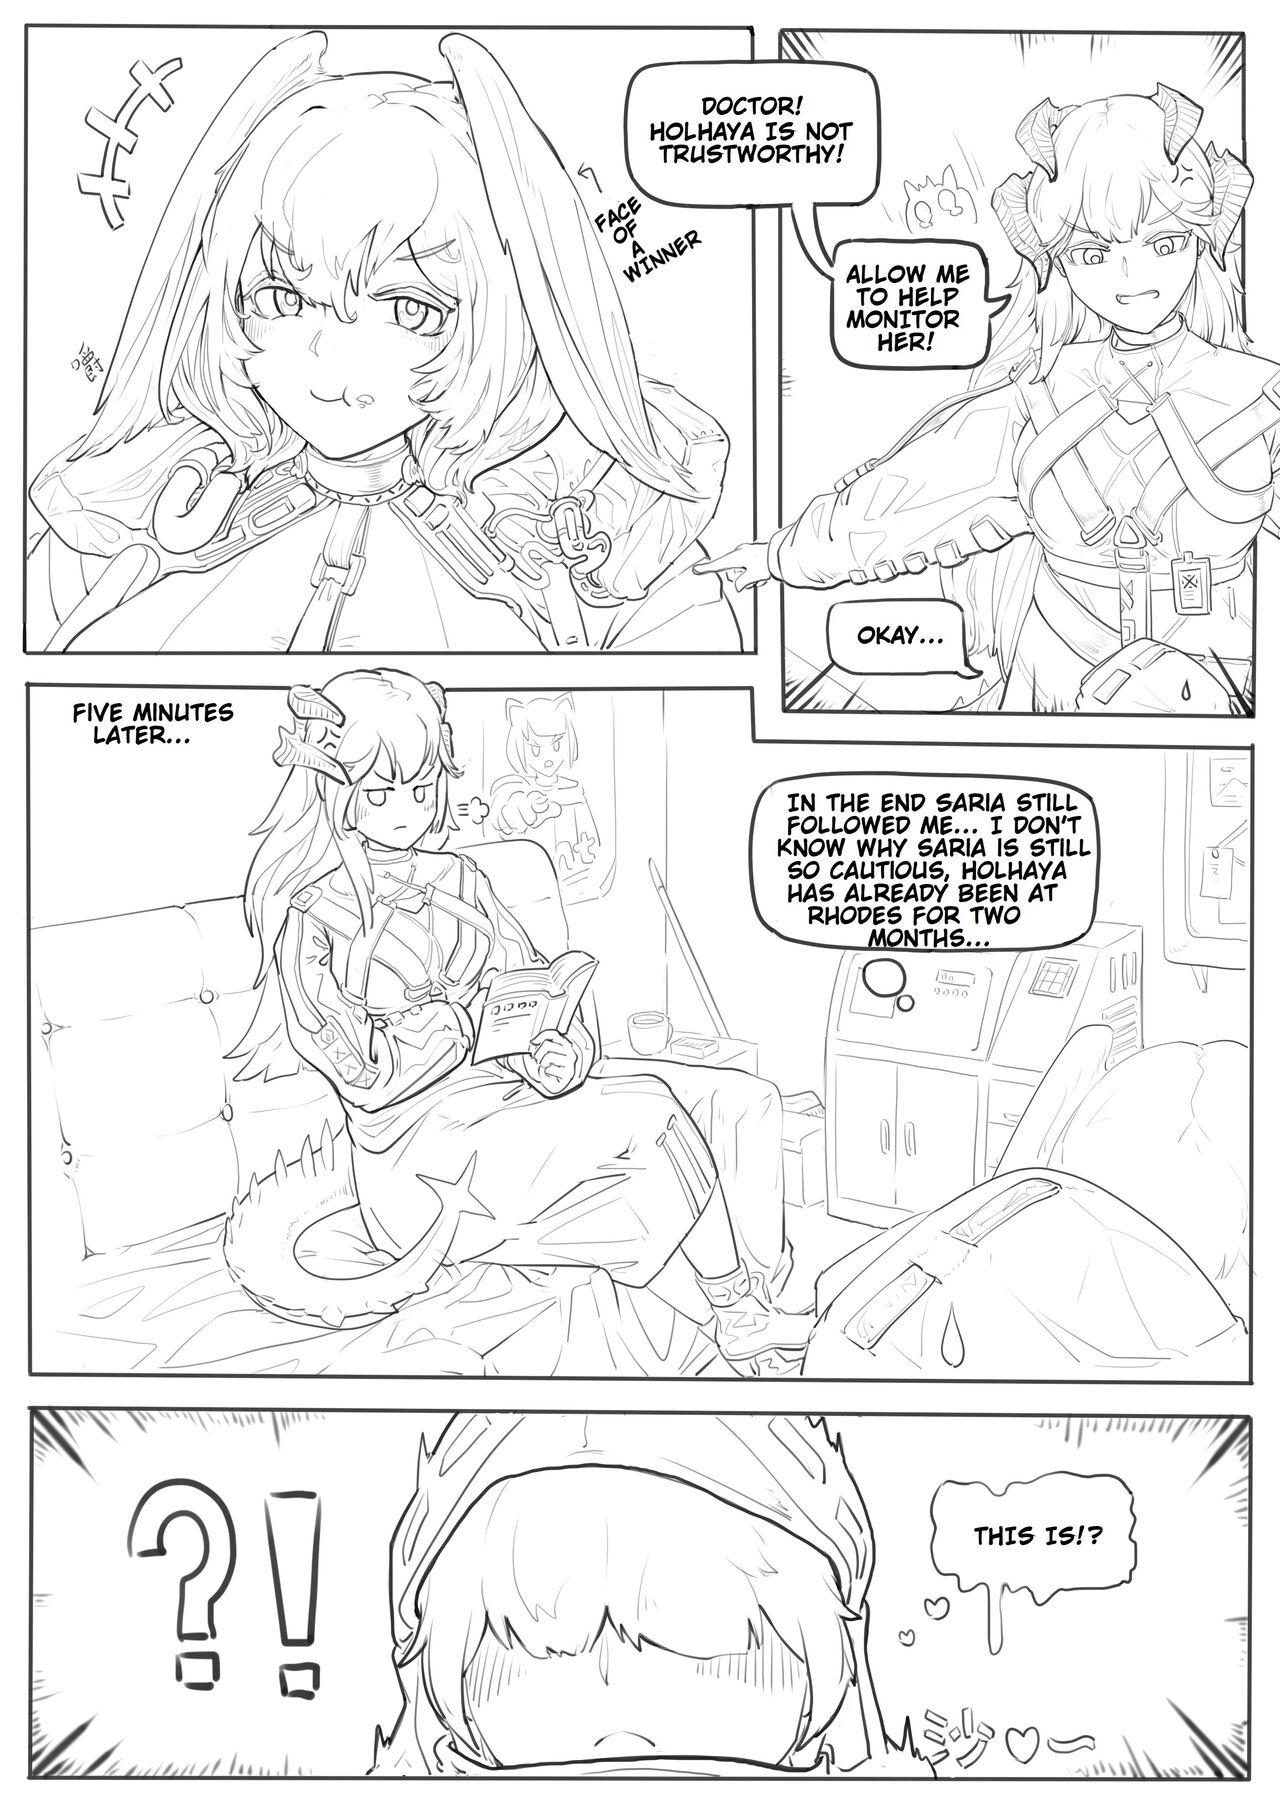 Holhaya and the Doctor's caressing routine (Arknights) [English) 6